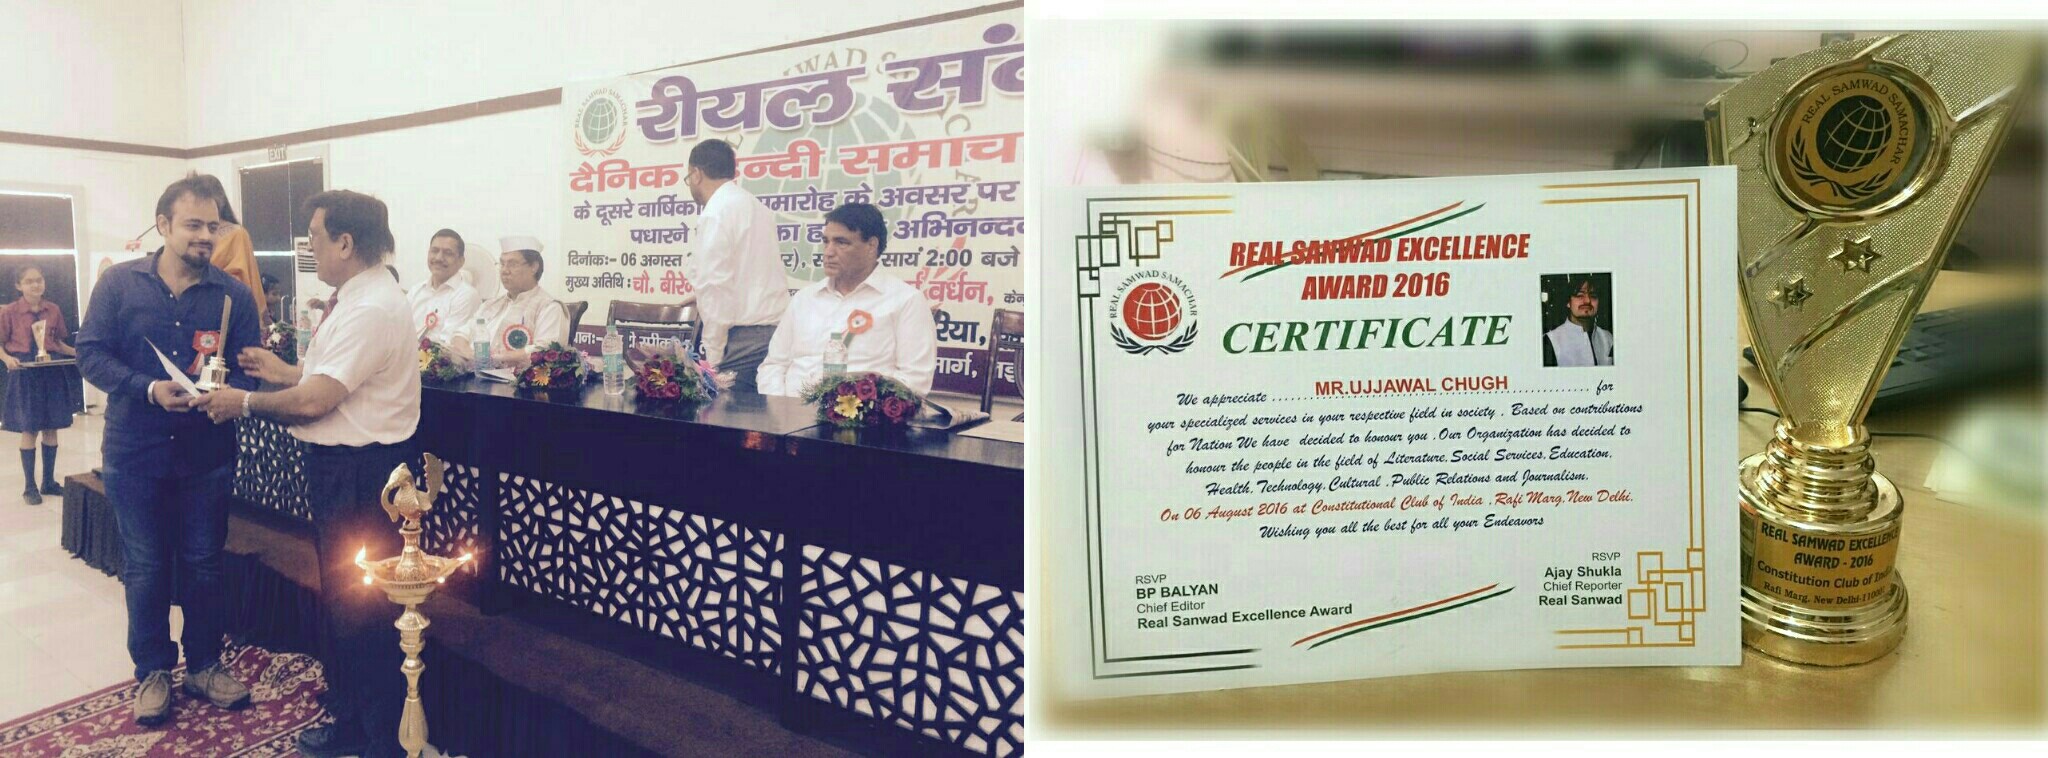 Awarded “Real Sanwad Excellence Award” 6th August 2016